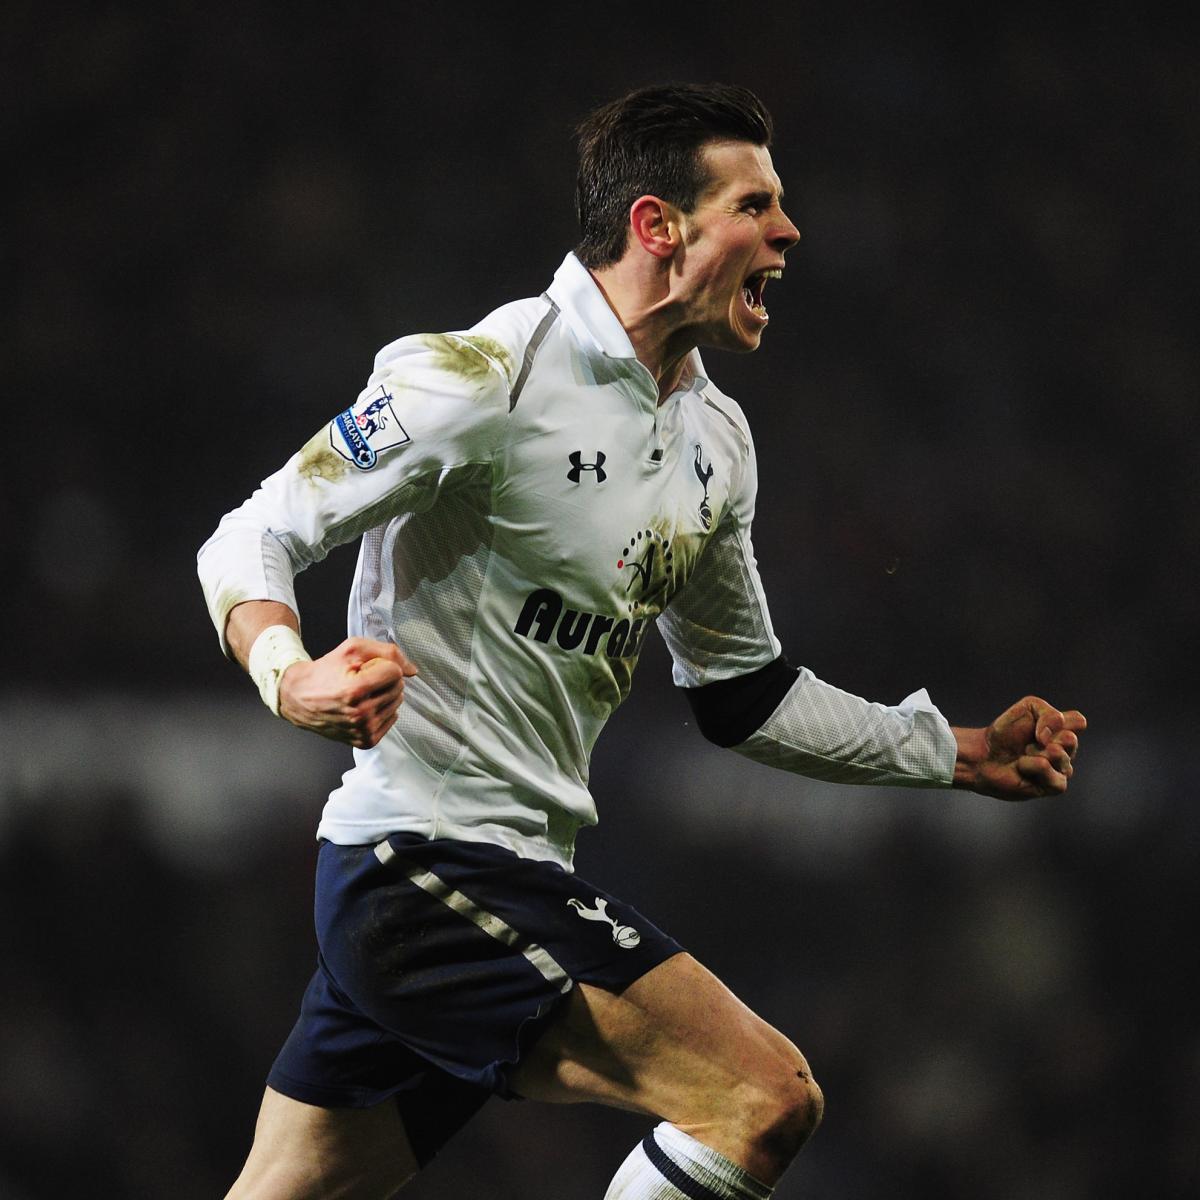 Tottenham Hotspur manager Andre Villas-Boas says Gareth Bale help lure top  players to White Hart Lane